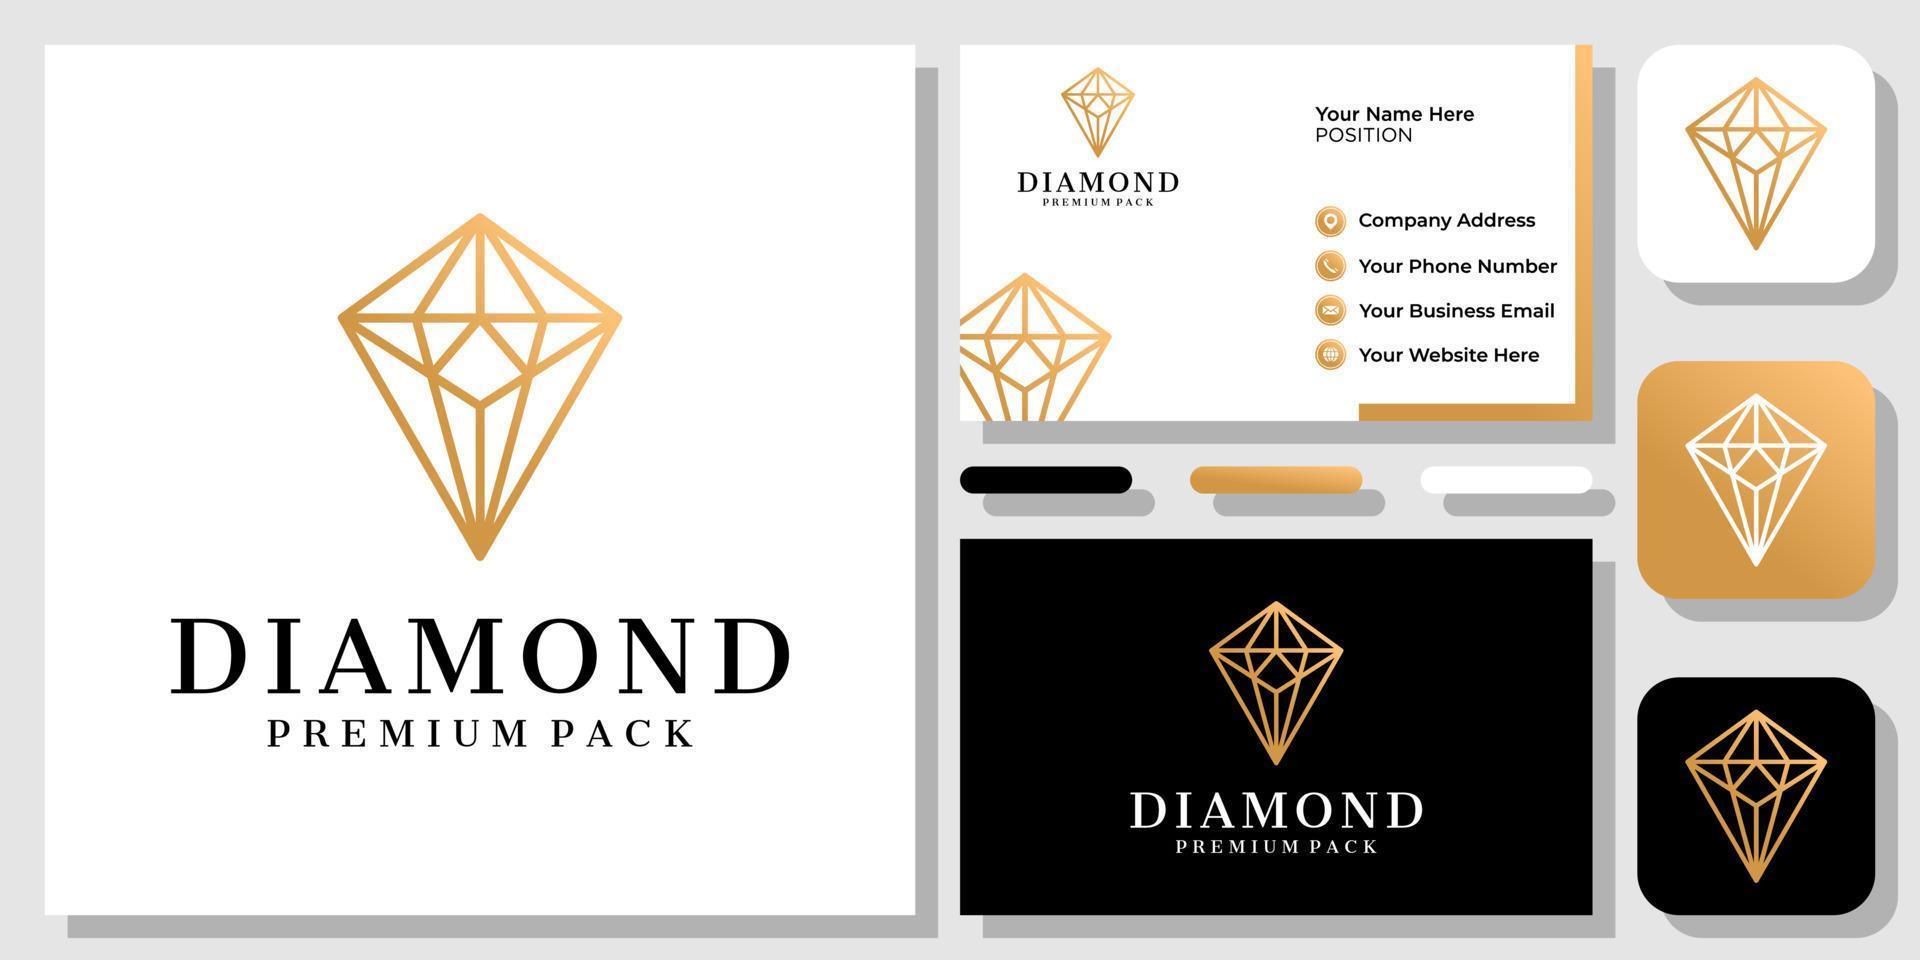 Diamond Gold Jewelry Premium Luxury Royal Glamour Class Logo Design with Business Card Template vector